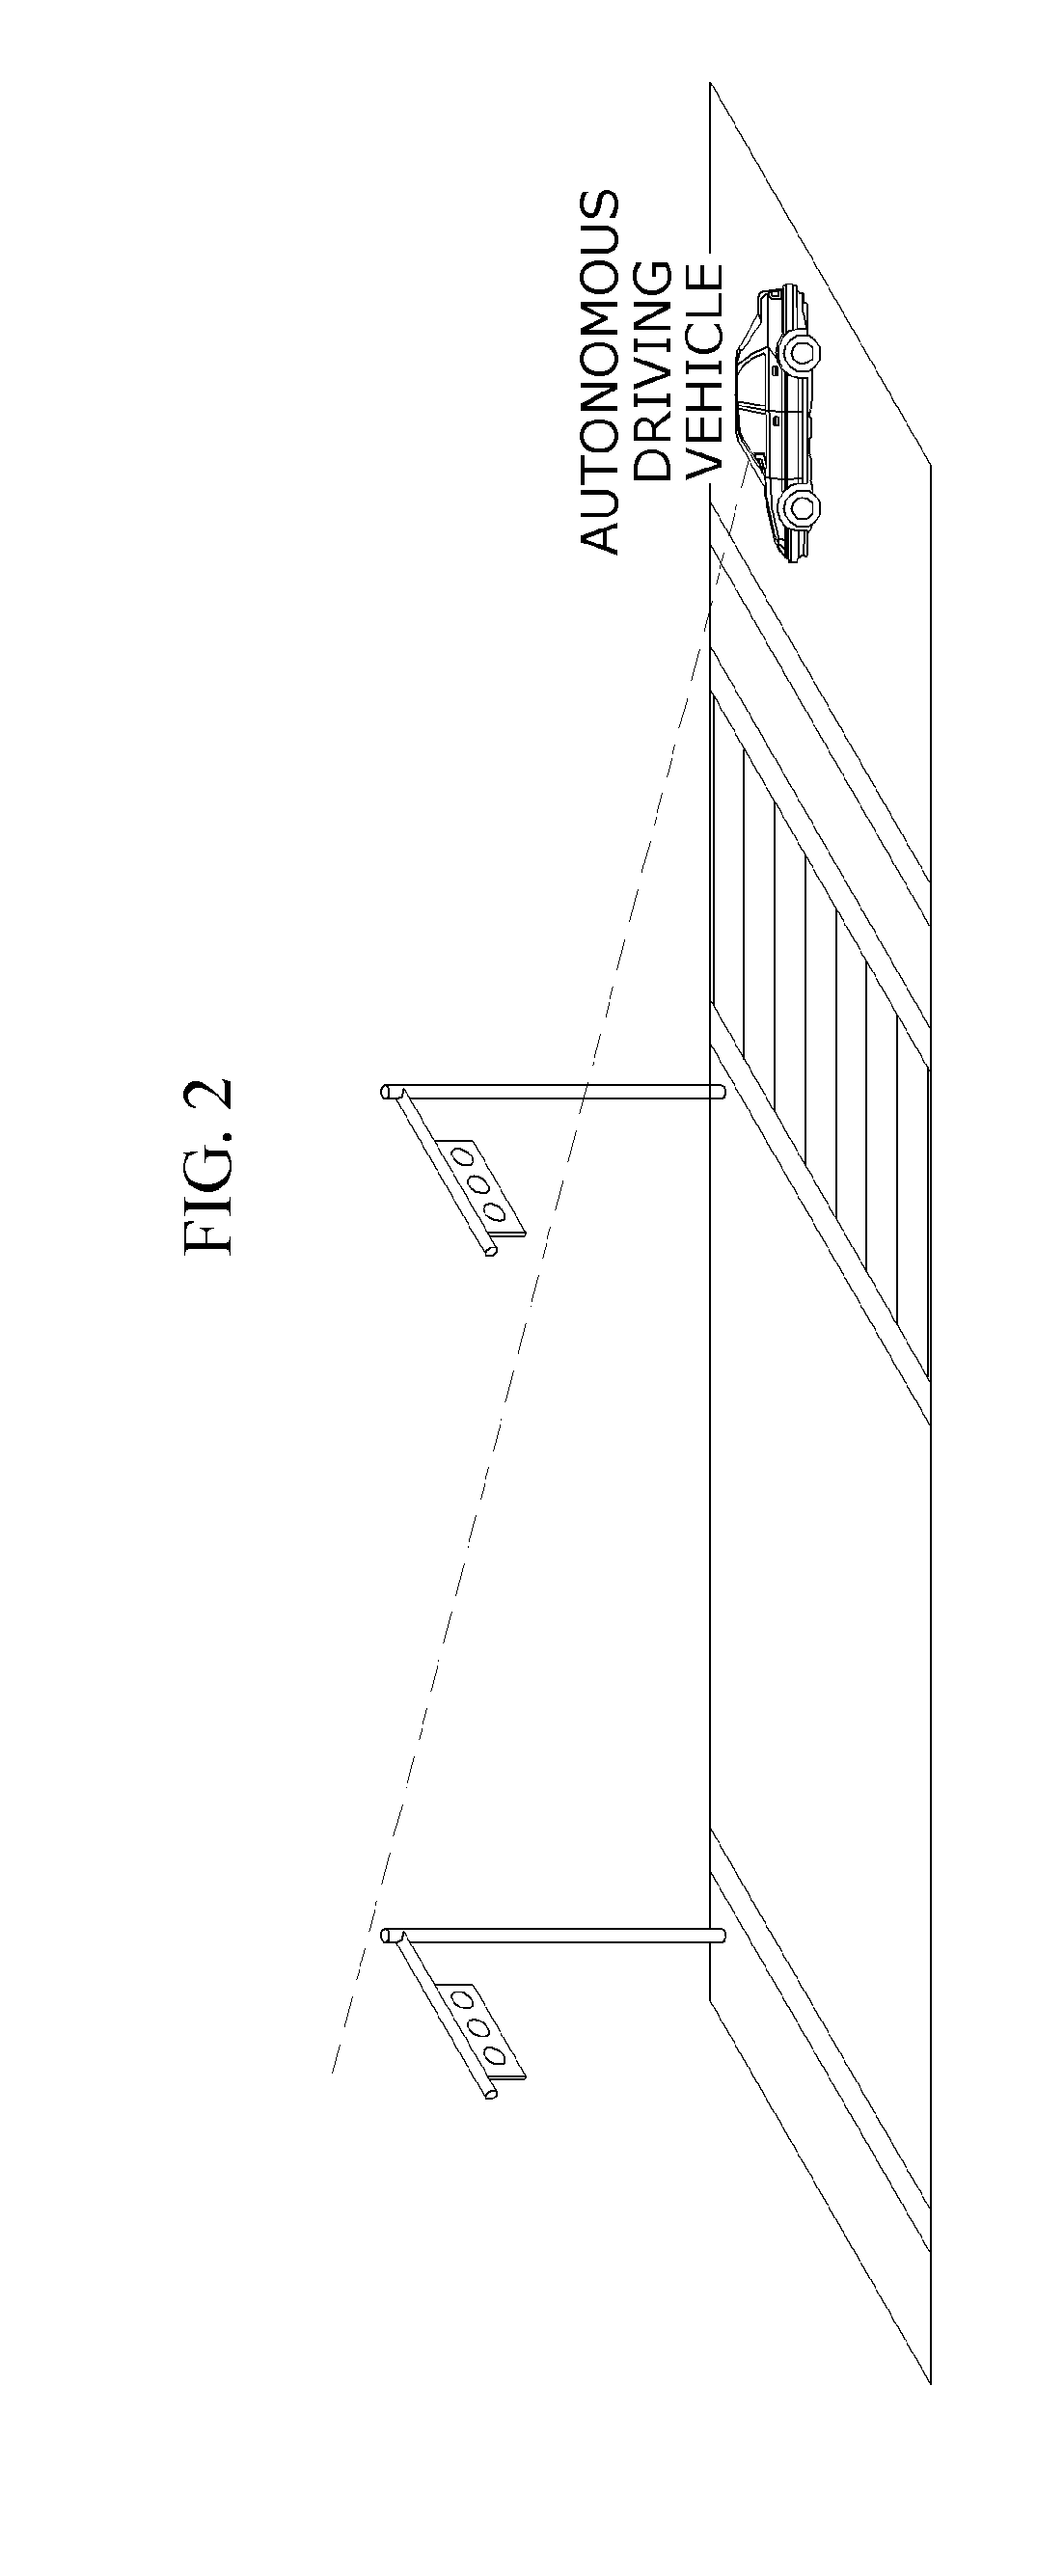 Autonomous vehicle driving system and method